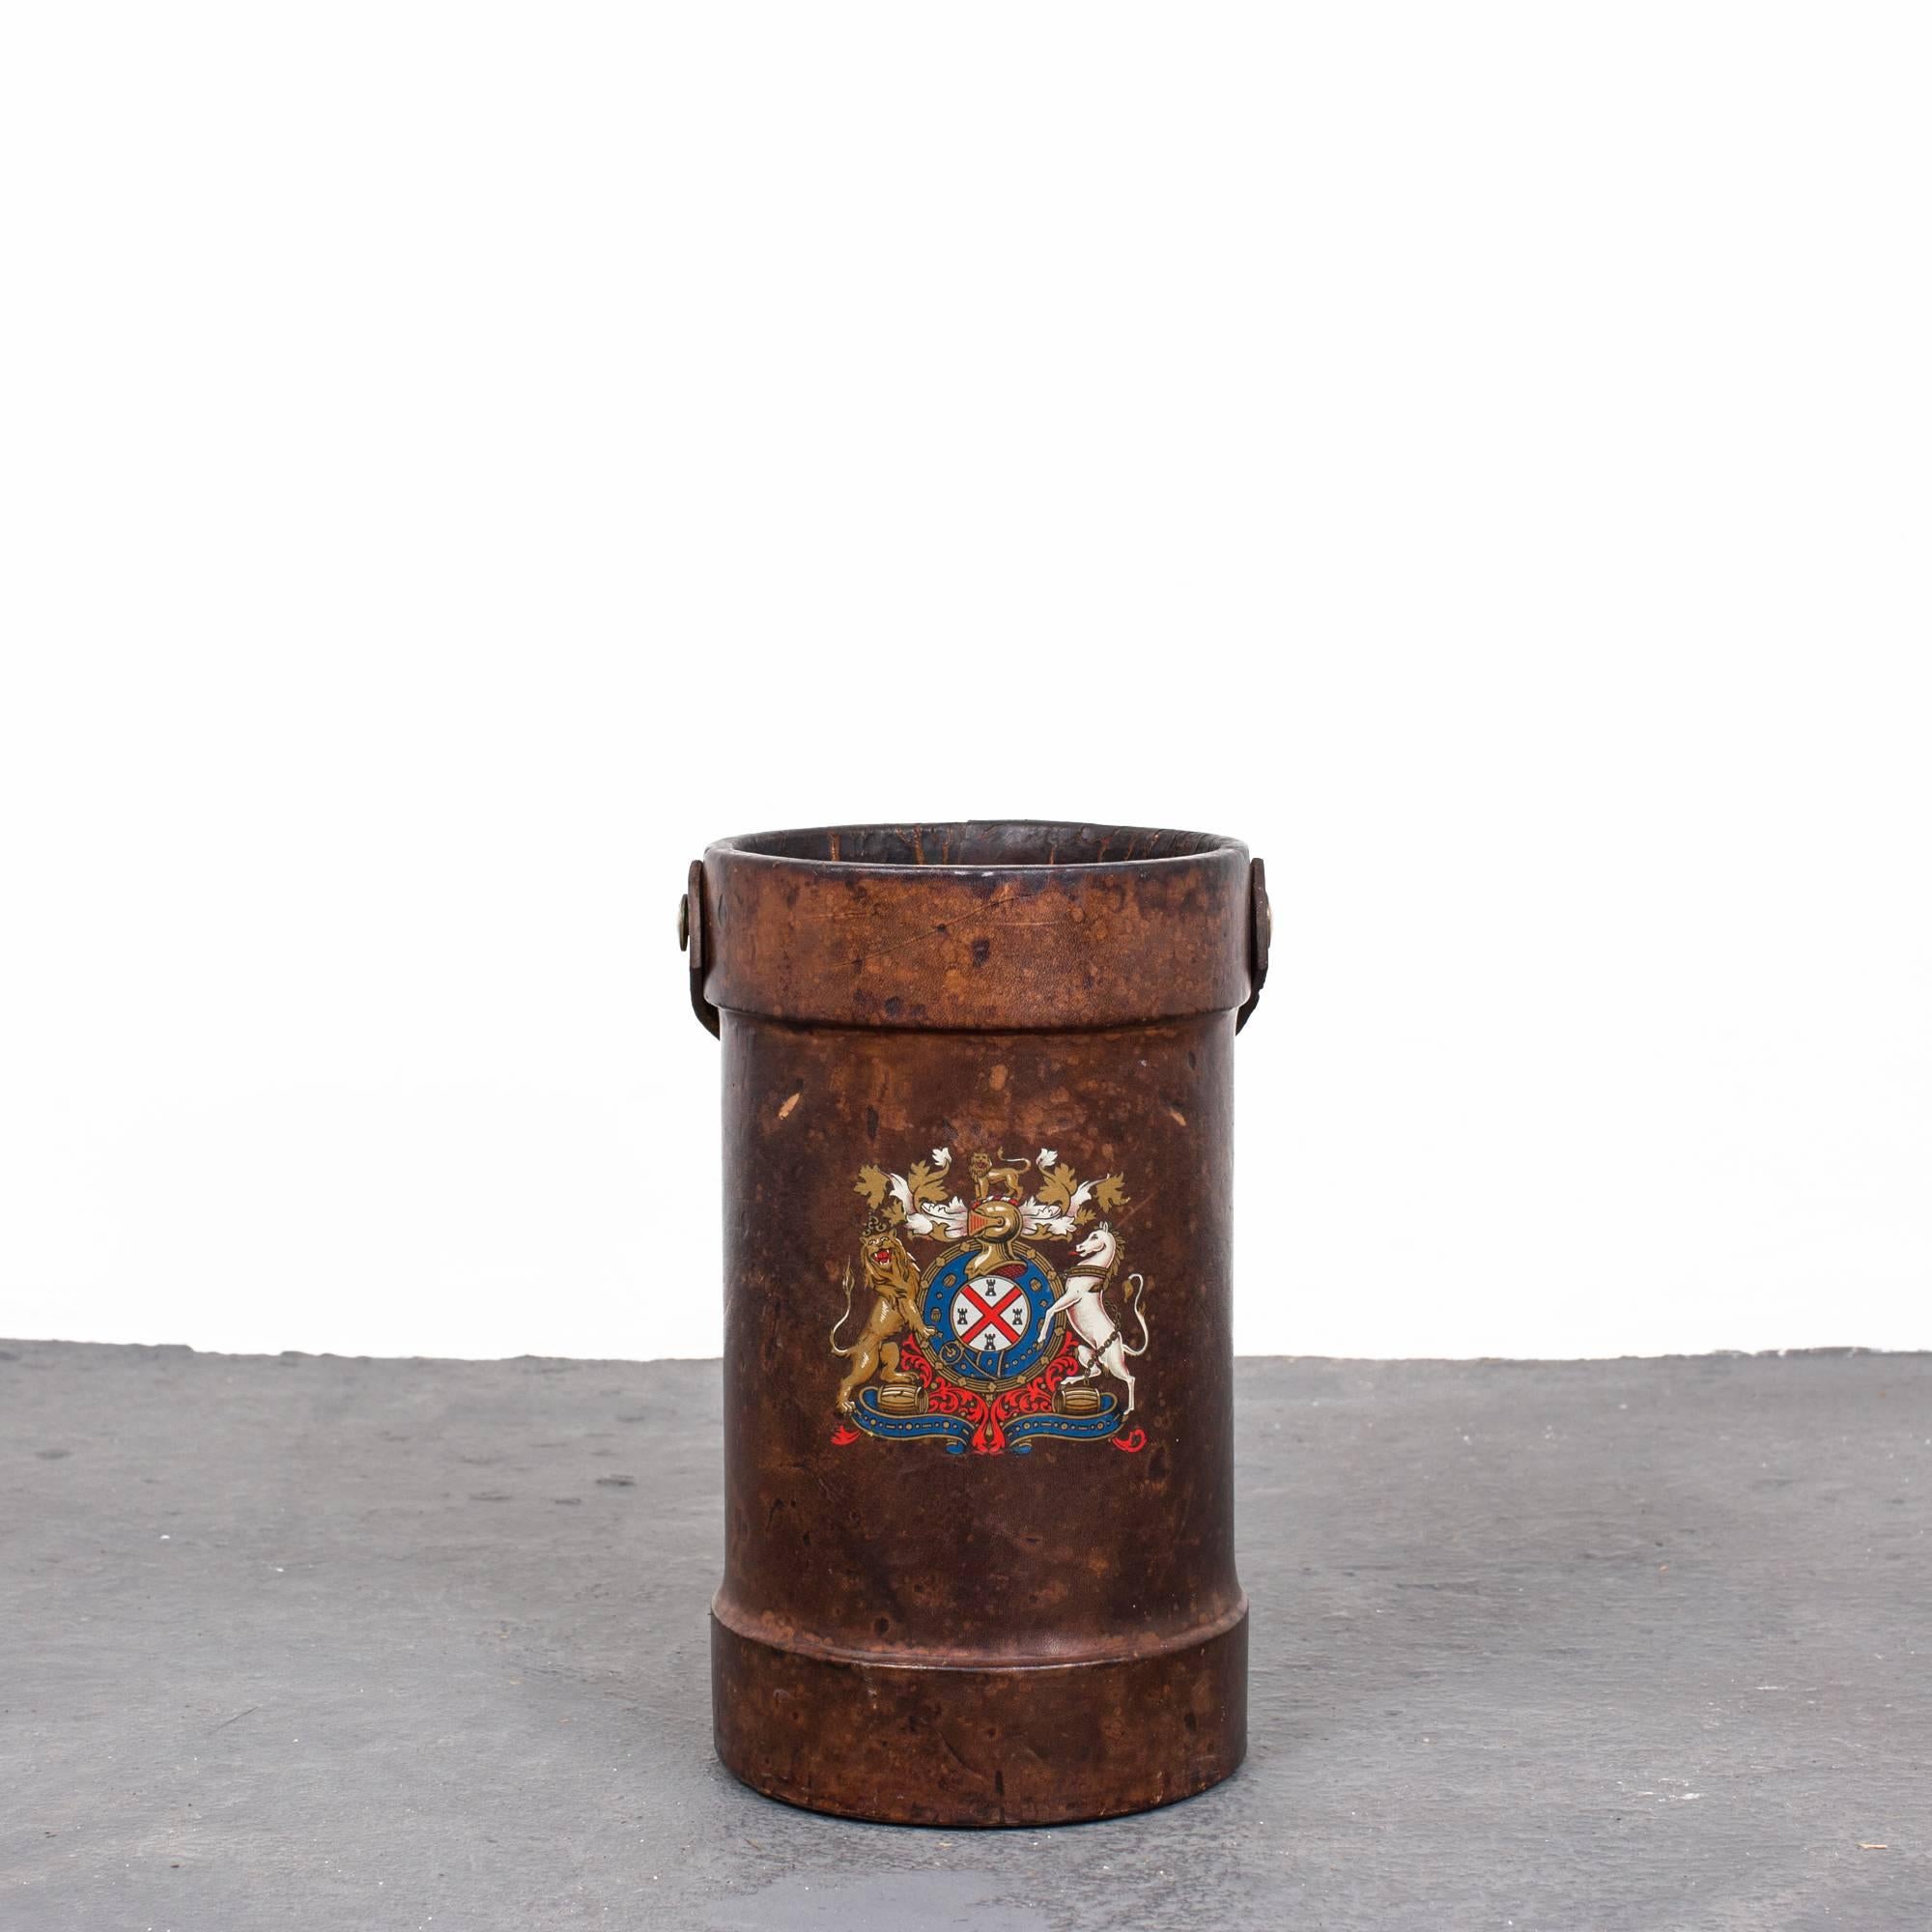 Fire bucket made in England during the 19th century. Canes are not included in the price. Canes are $100-$250 each.